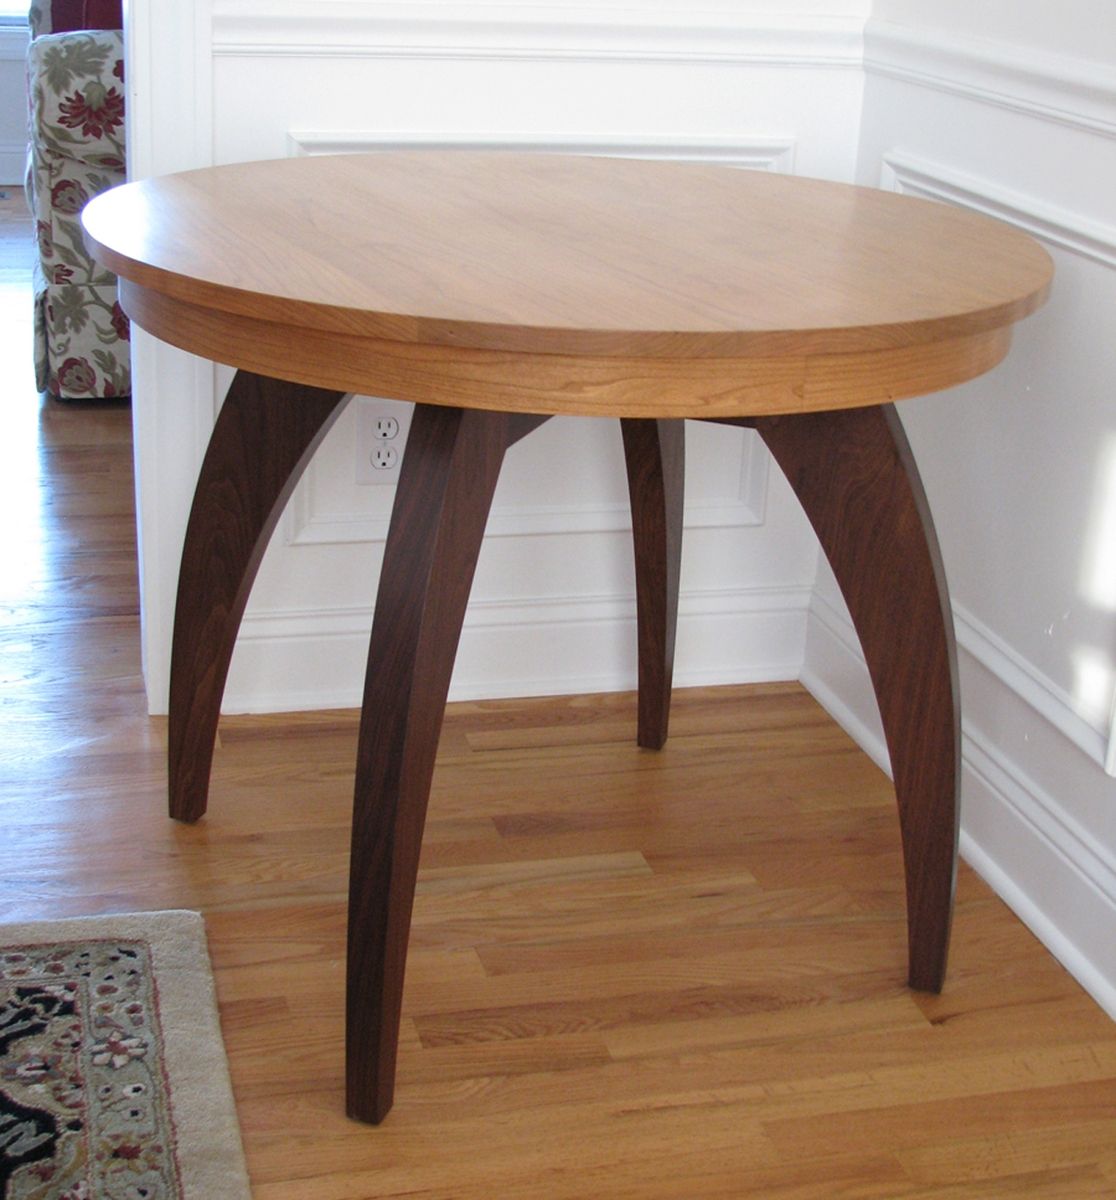 Custom Made Kitchen/Dining Table by Katherine Park | CustomMade.com